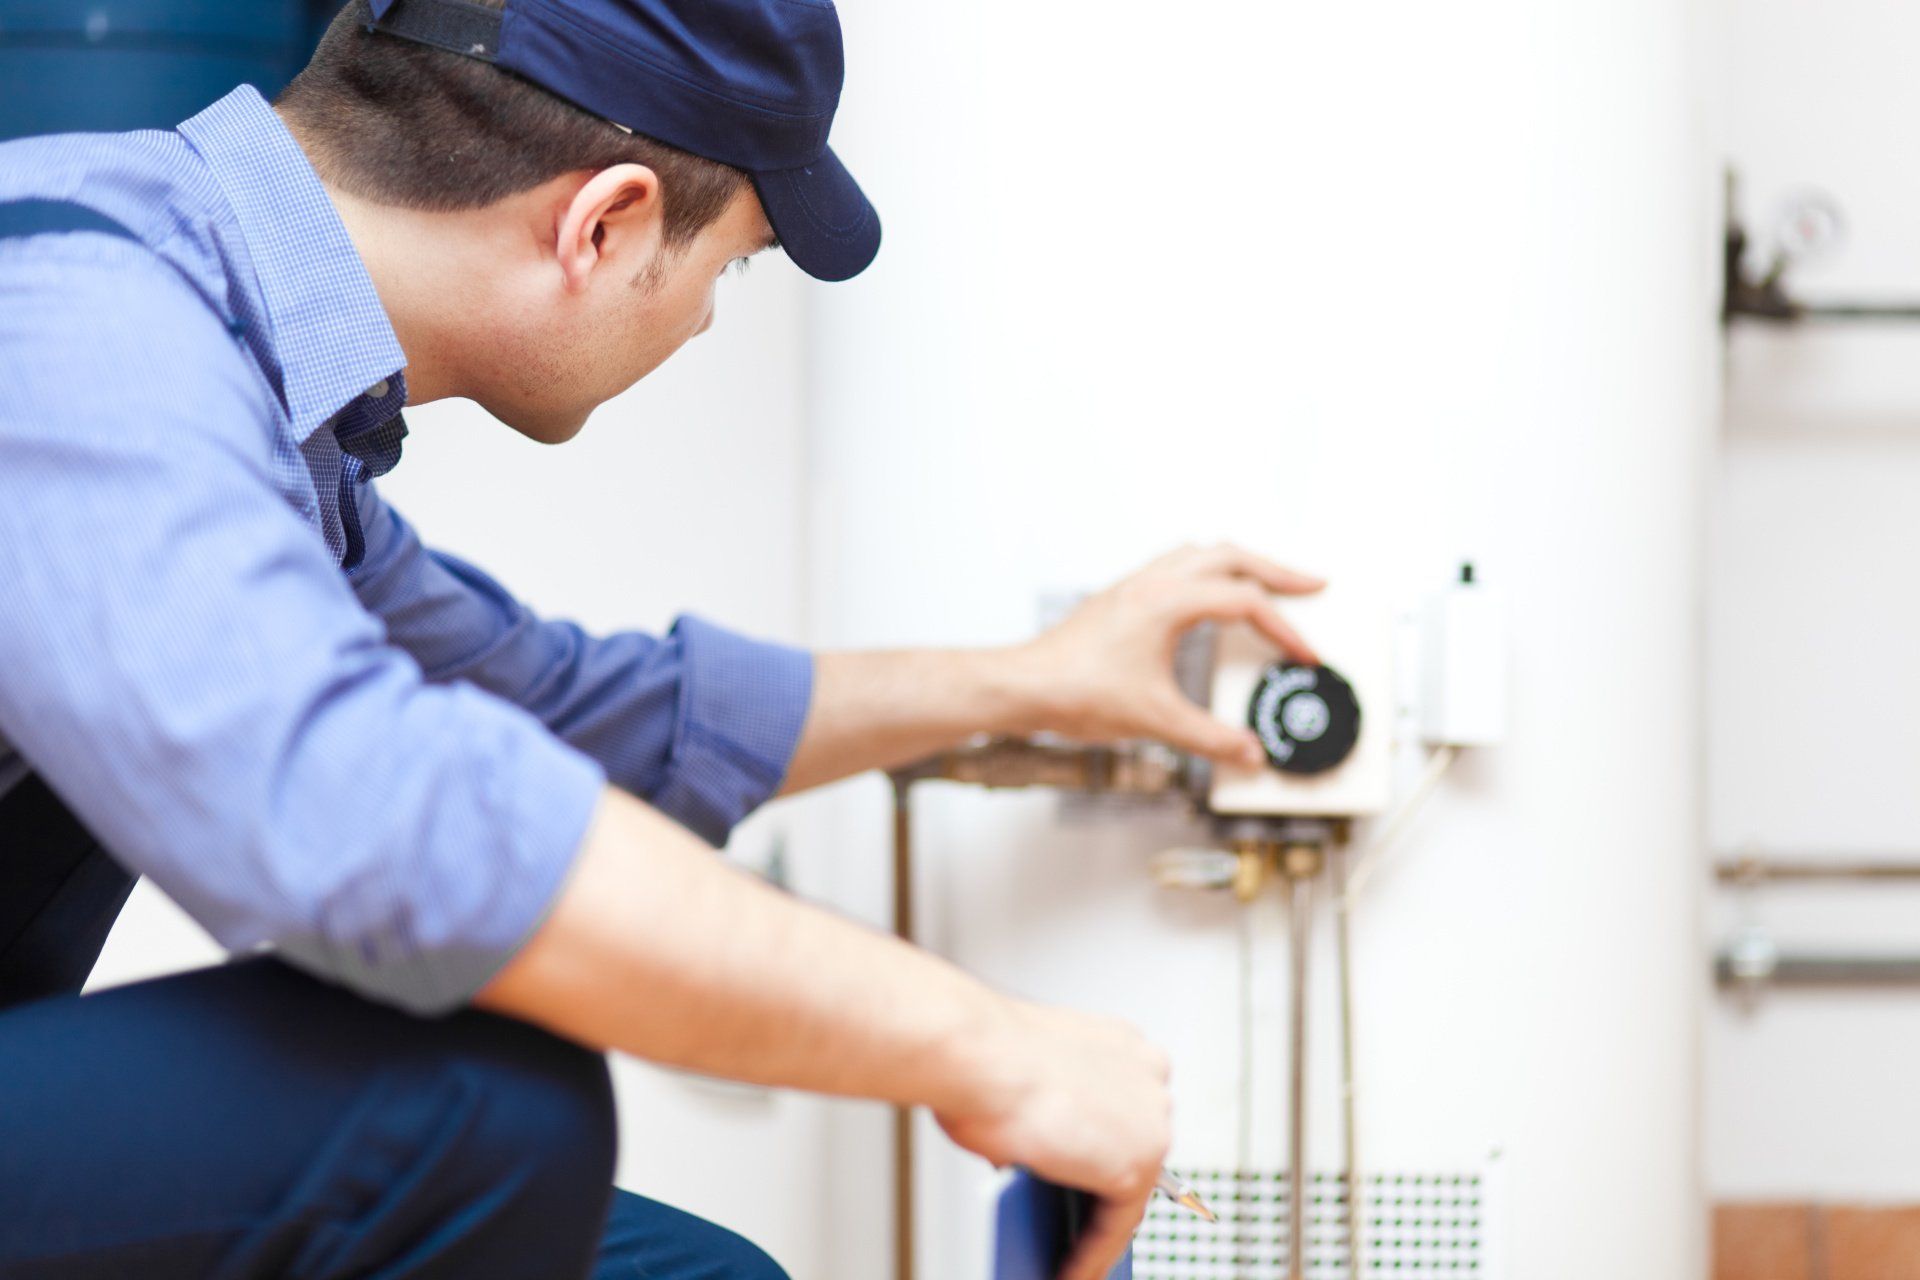 Baton Rouge Heater Service: The Value of a Second Opinion